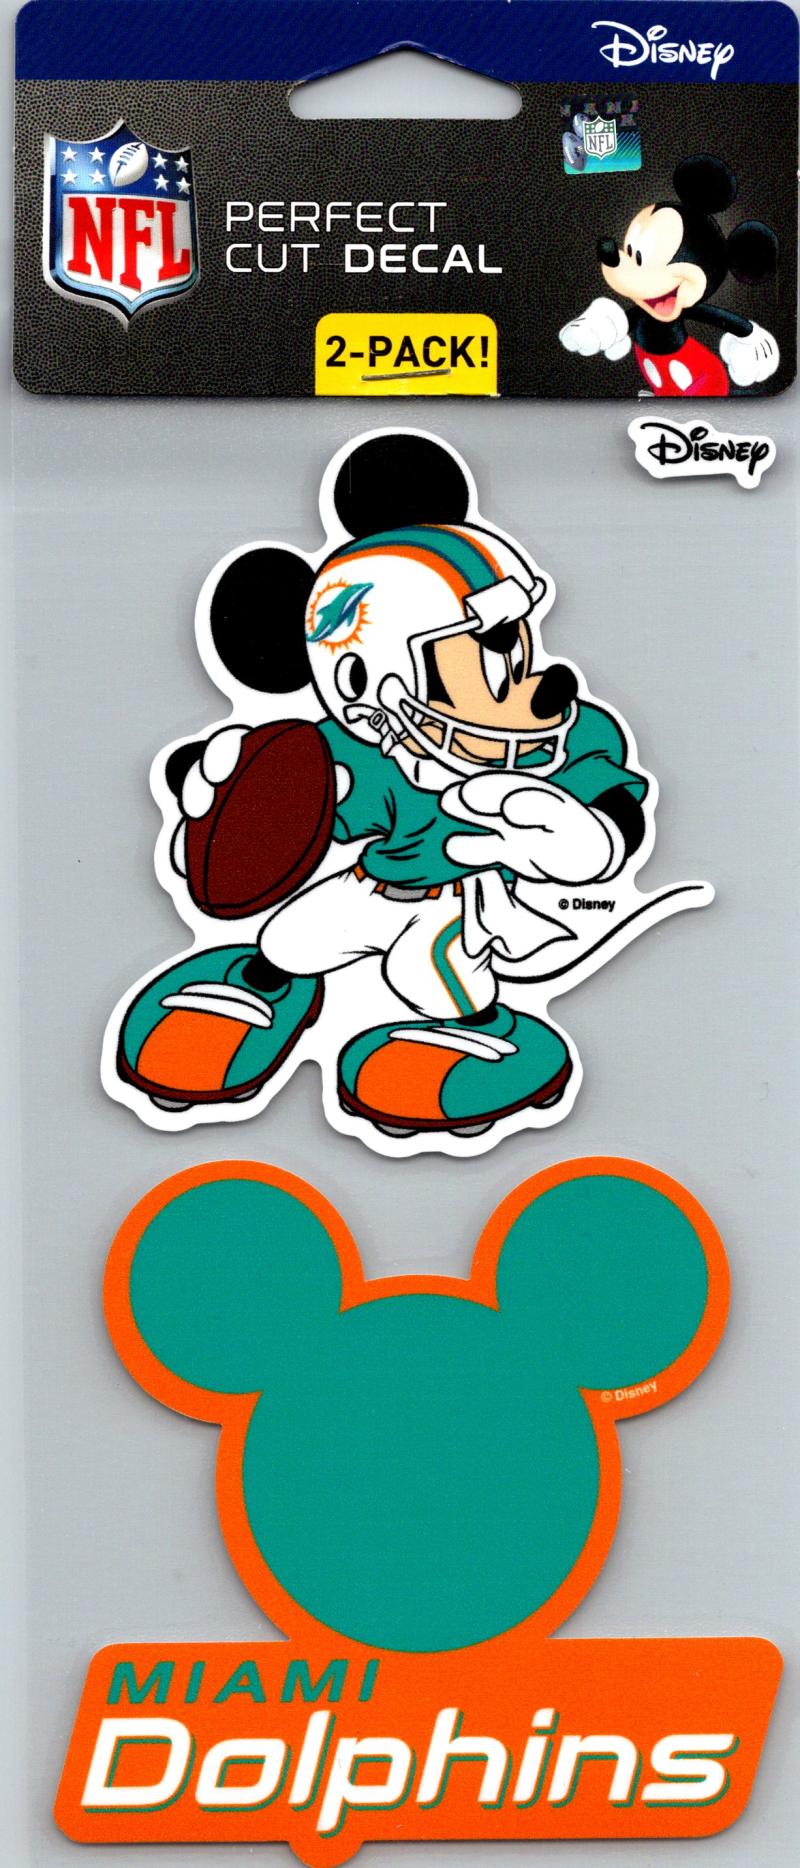 Miami Dolphins Disney Perfect Cut 4"x4" Decal Sticker Pack of 2